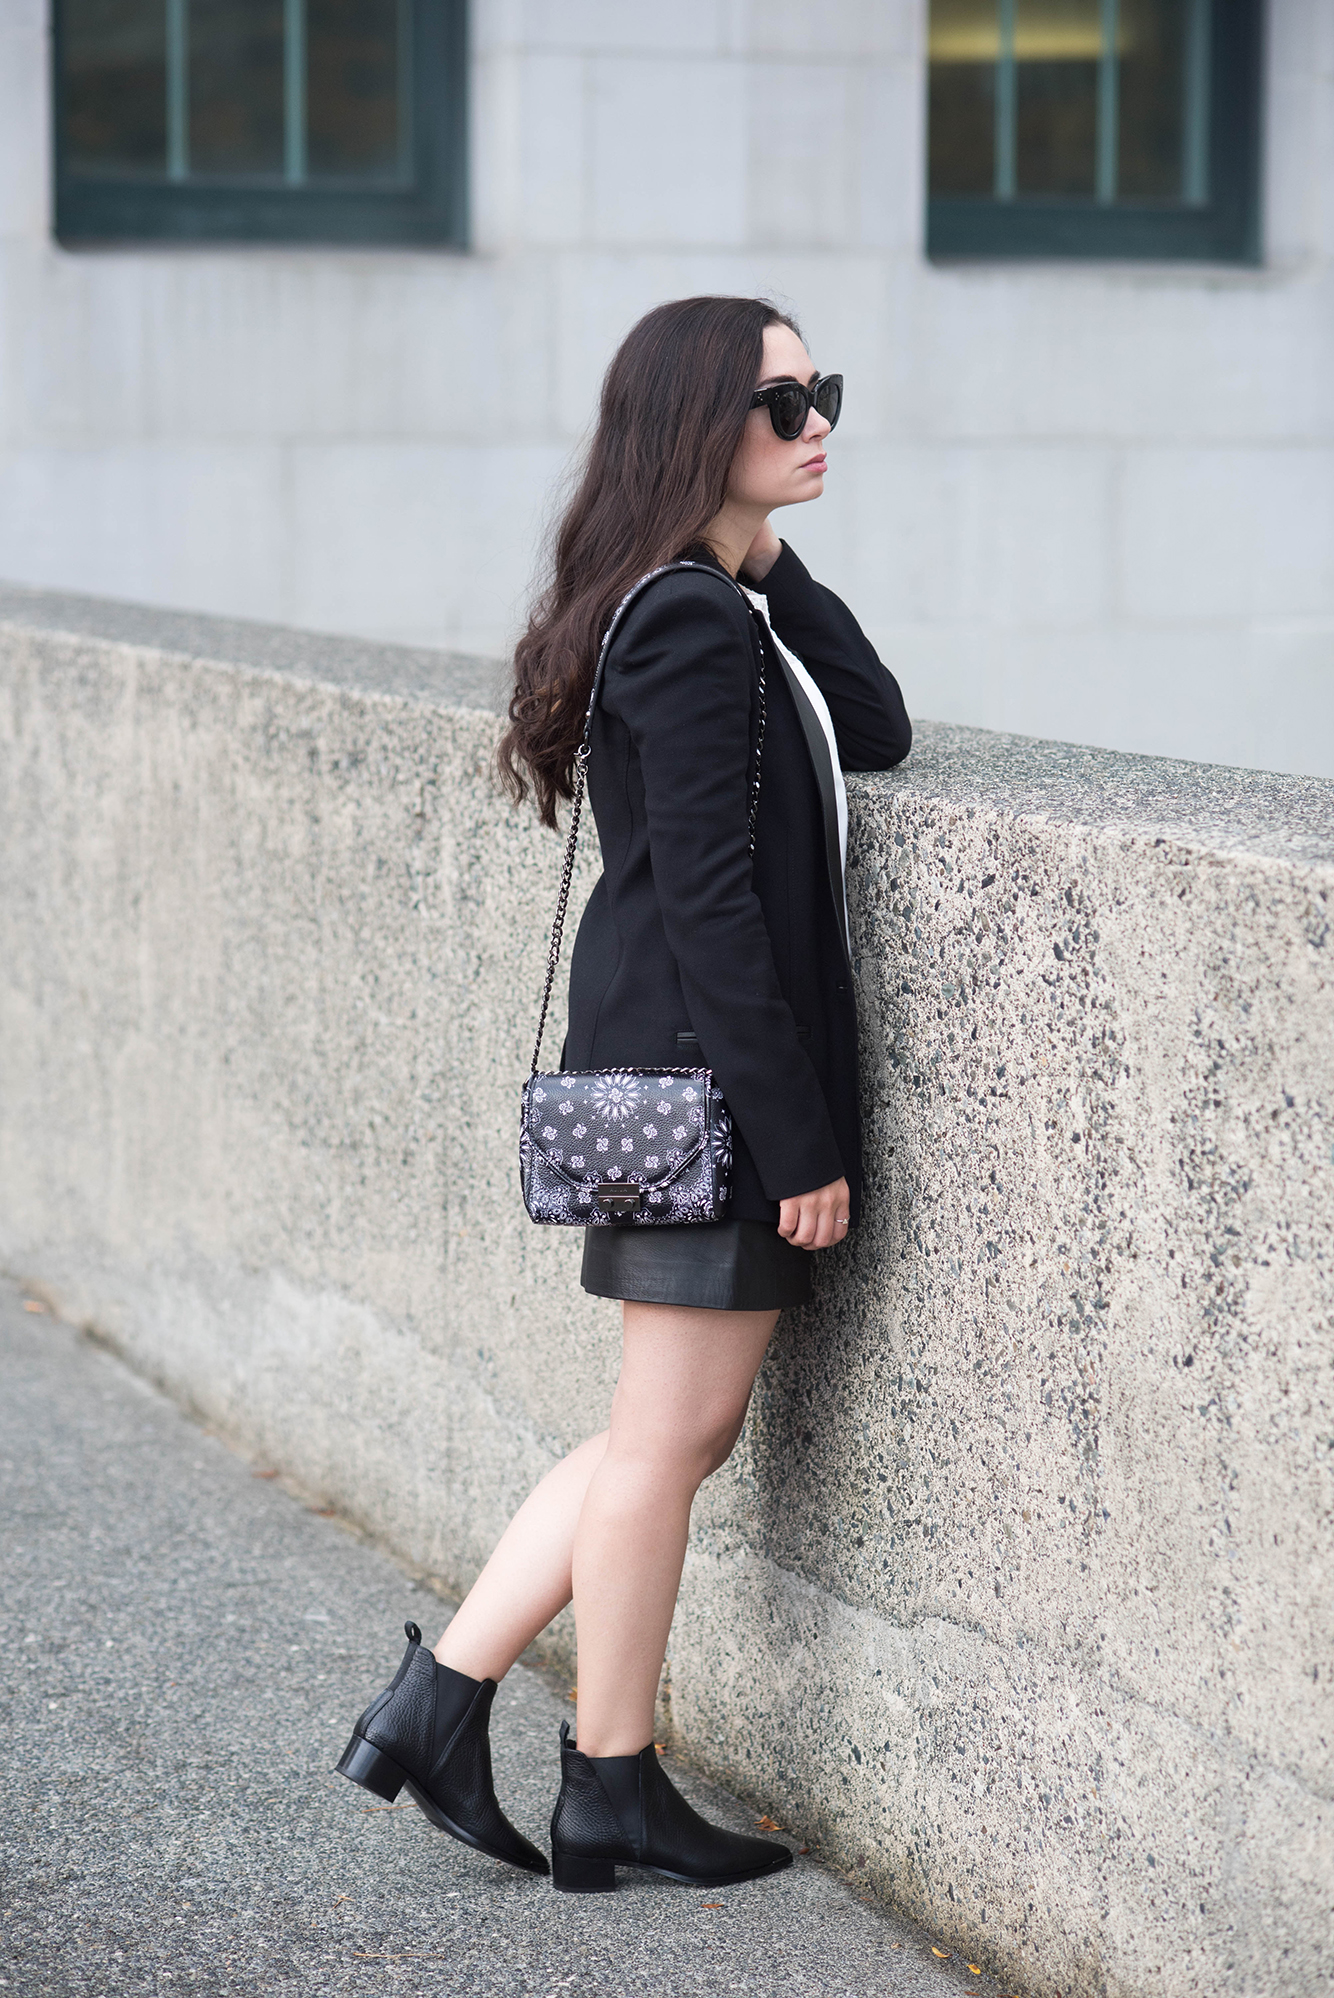 coco-and-vera-top-vancouver-fashion-blog-top-canadian-fashion-blog-top-blogger-street-style-leather-mini-skirt-helmut-lang-blazer-acne-studios-boots-alila-bag-celine-audrey-sunglasses